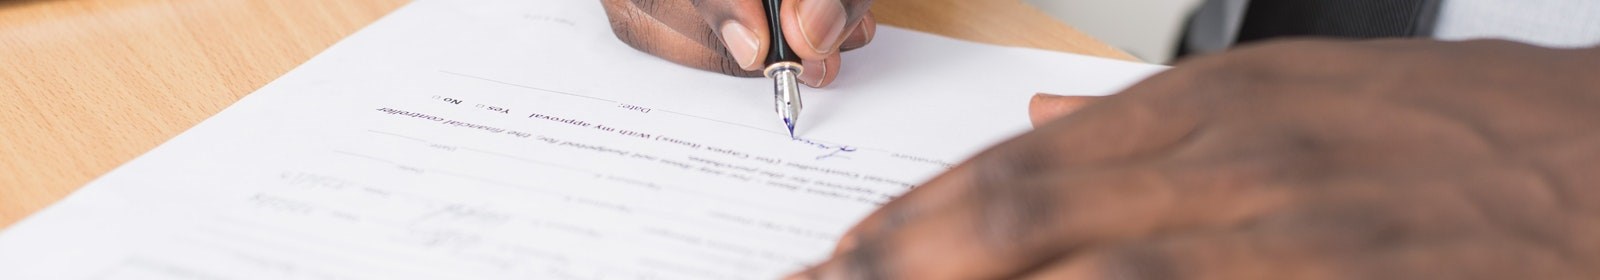 Importance of checking documents carefully before signing an offer to purchase